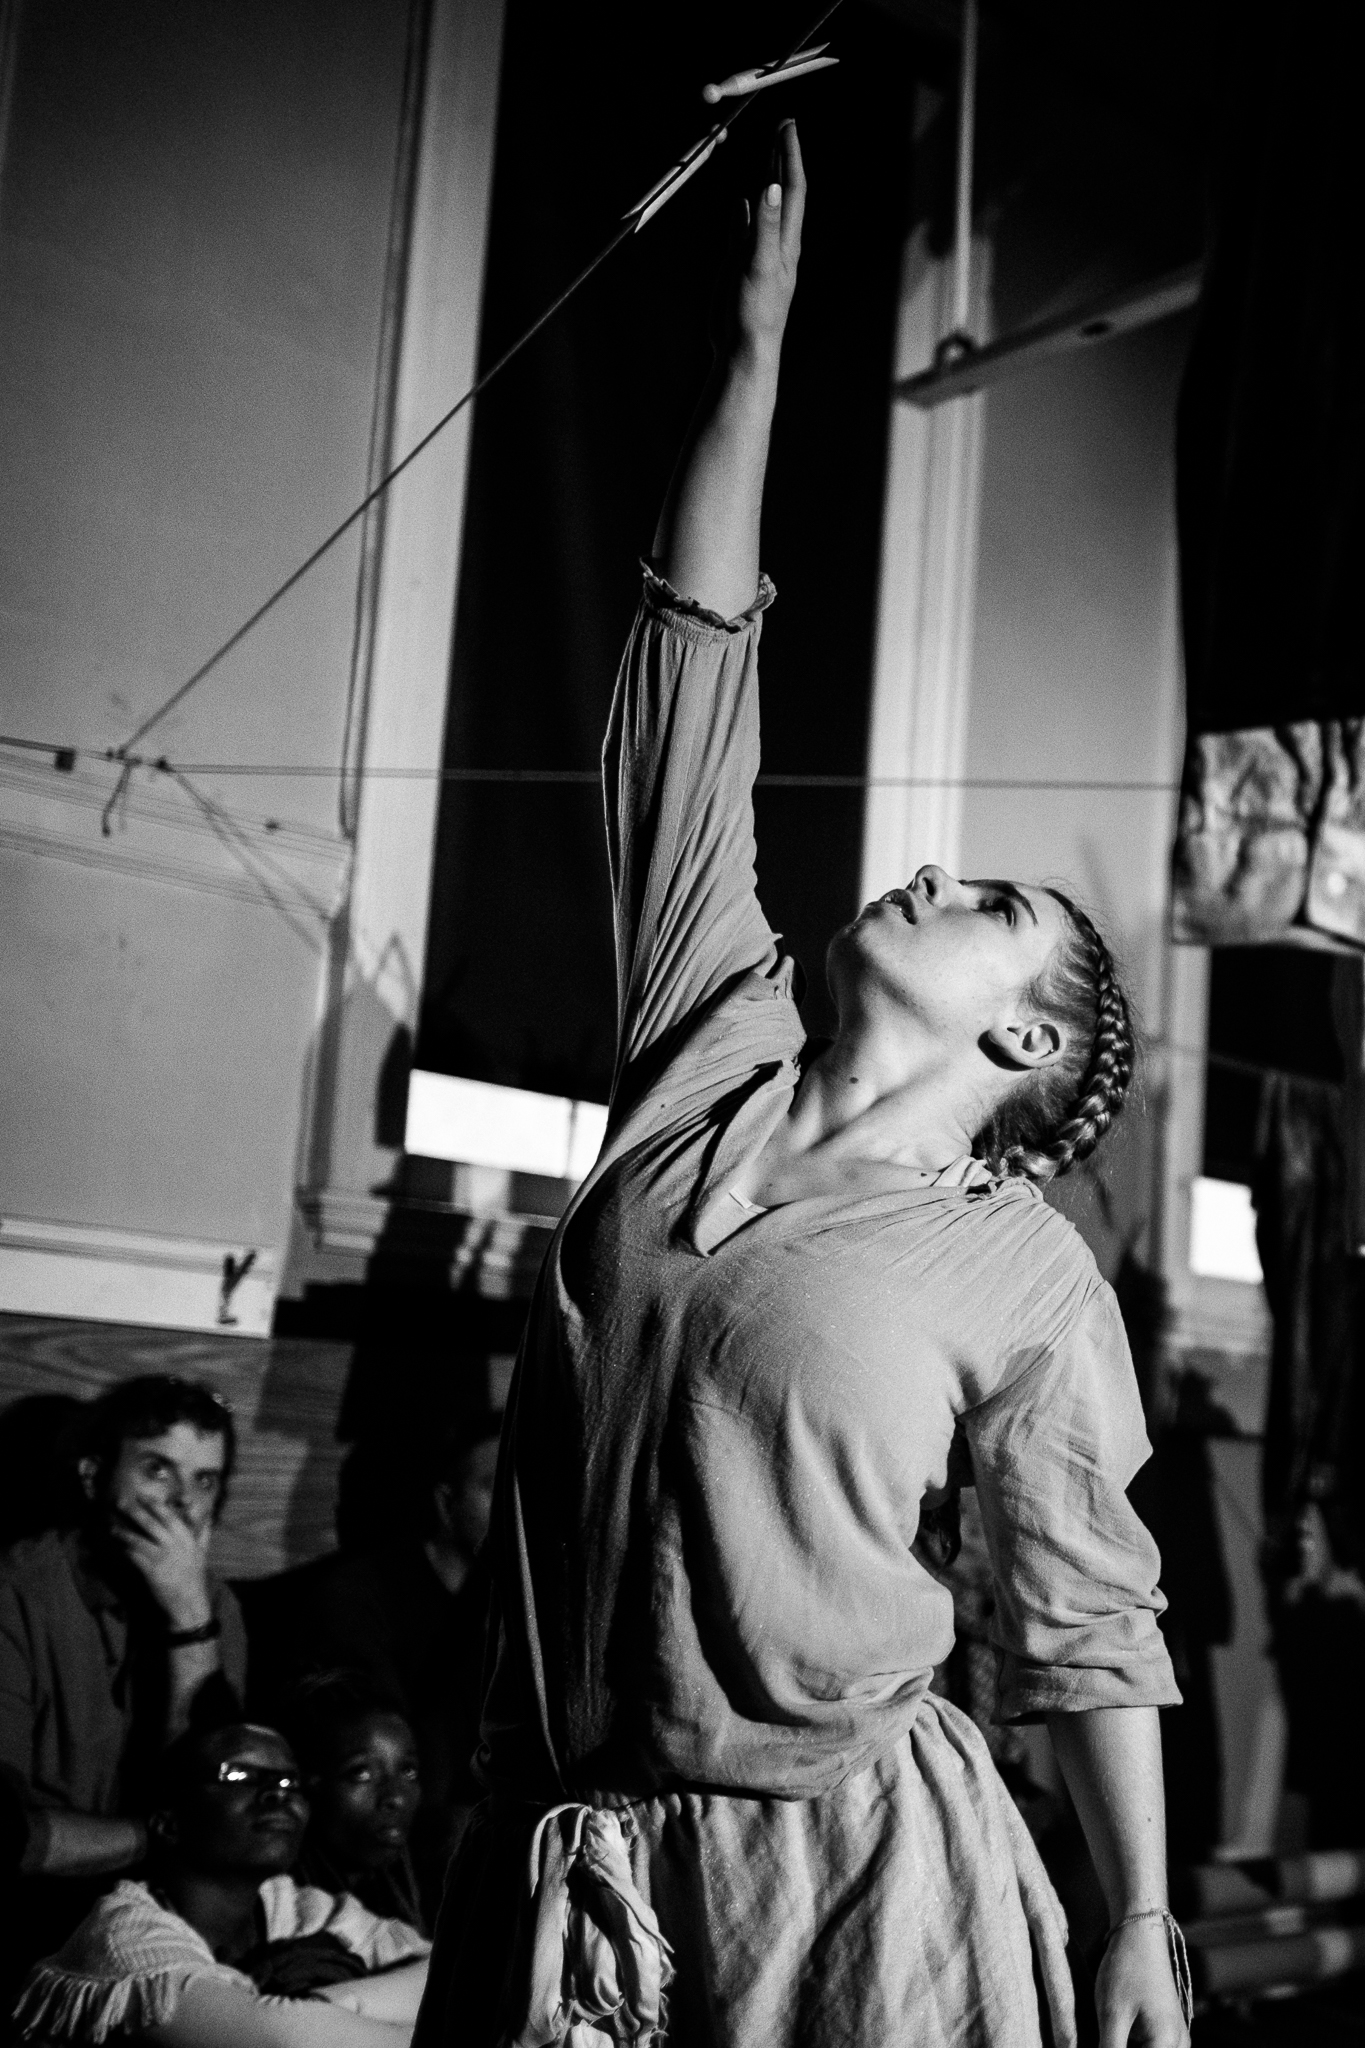 Restoke You Are Here Matinee and Final Night Performance Show Dance Spoken Word Poetry Music Culture Home Migration Belonging - Jenny Harper Photography-5.jpg